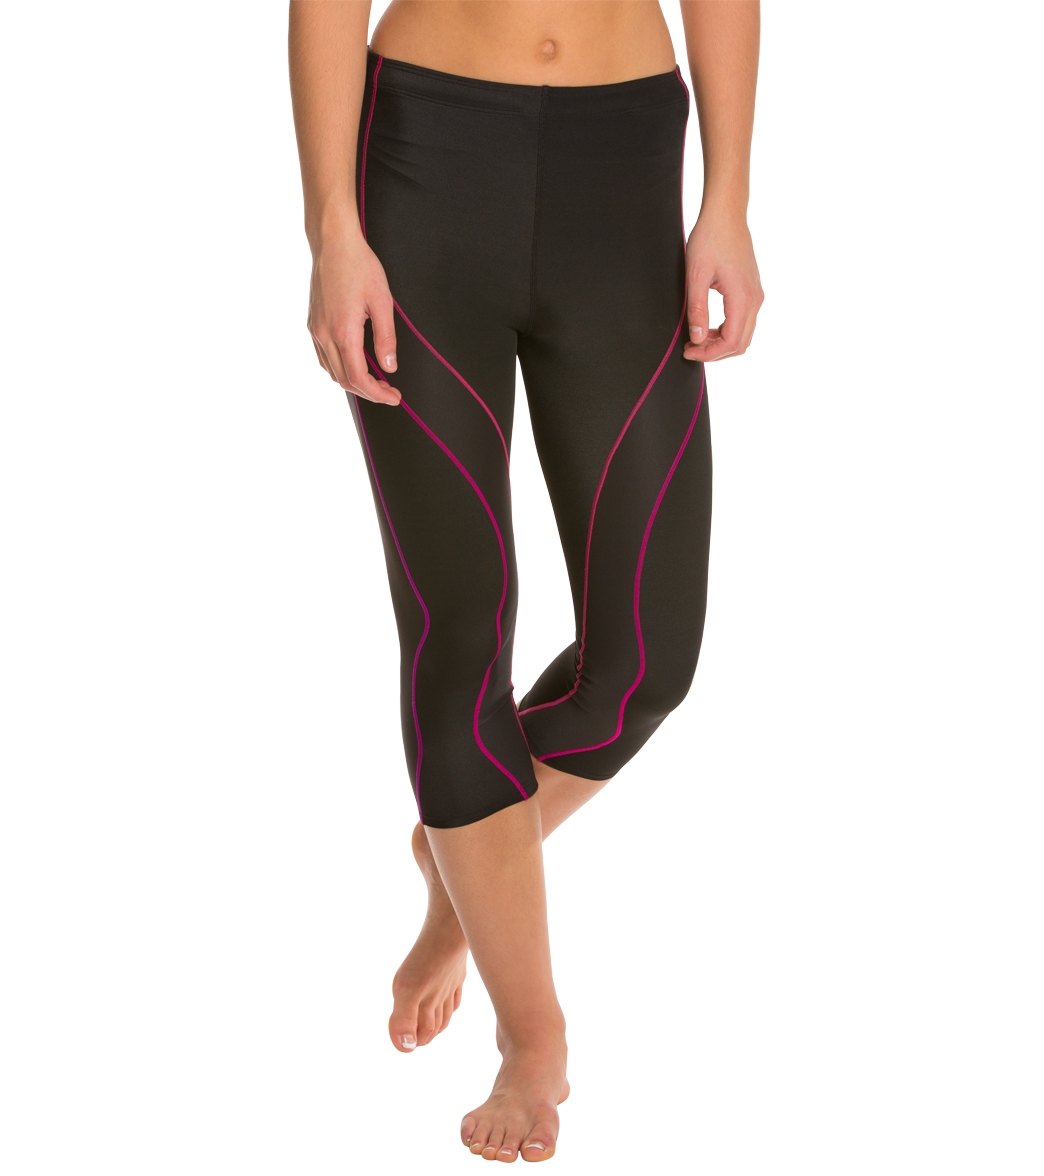 CW-X Women's PerformX 3/4 Running Tights at